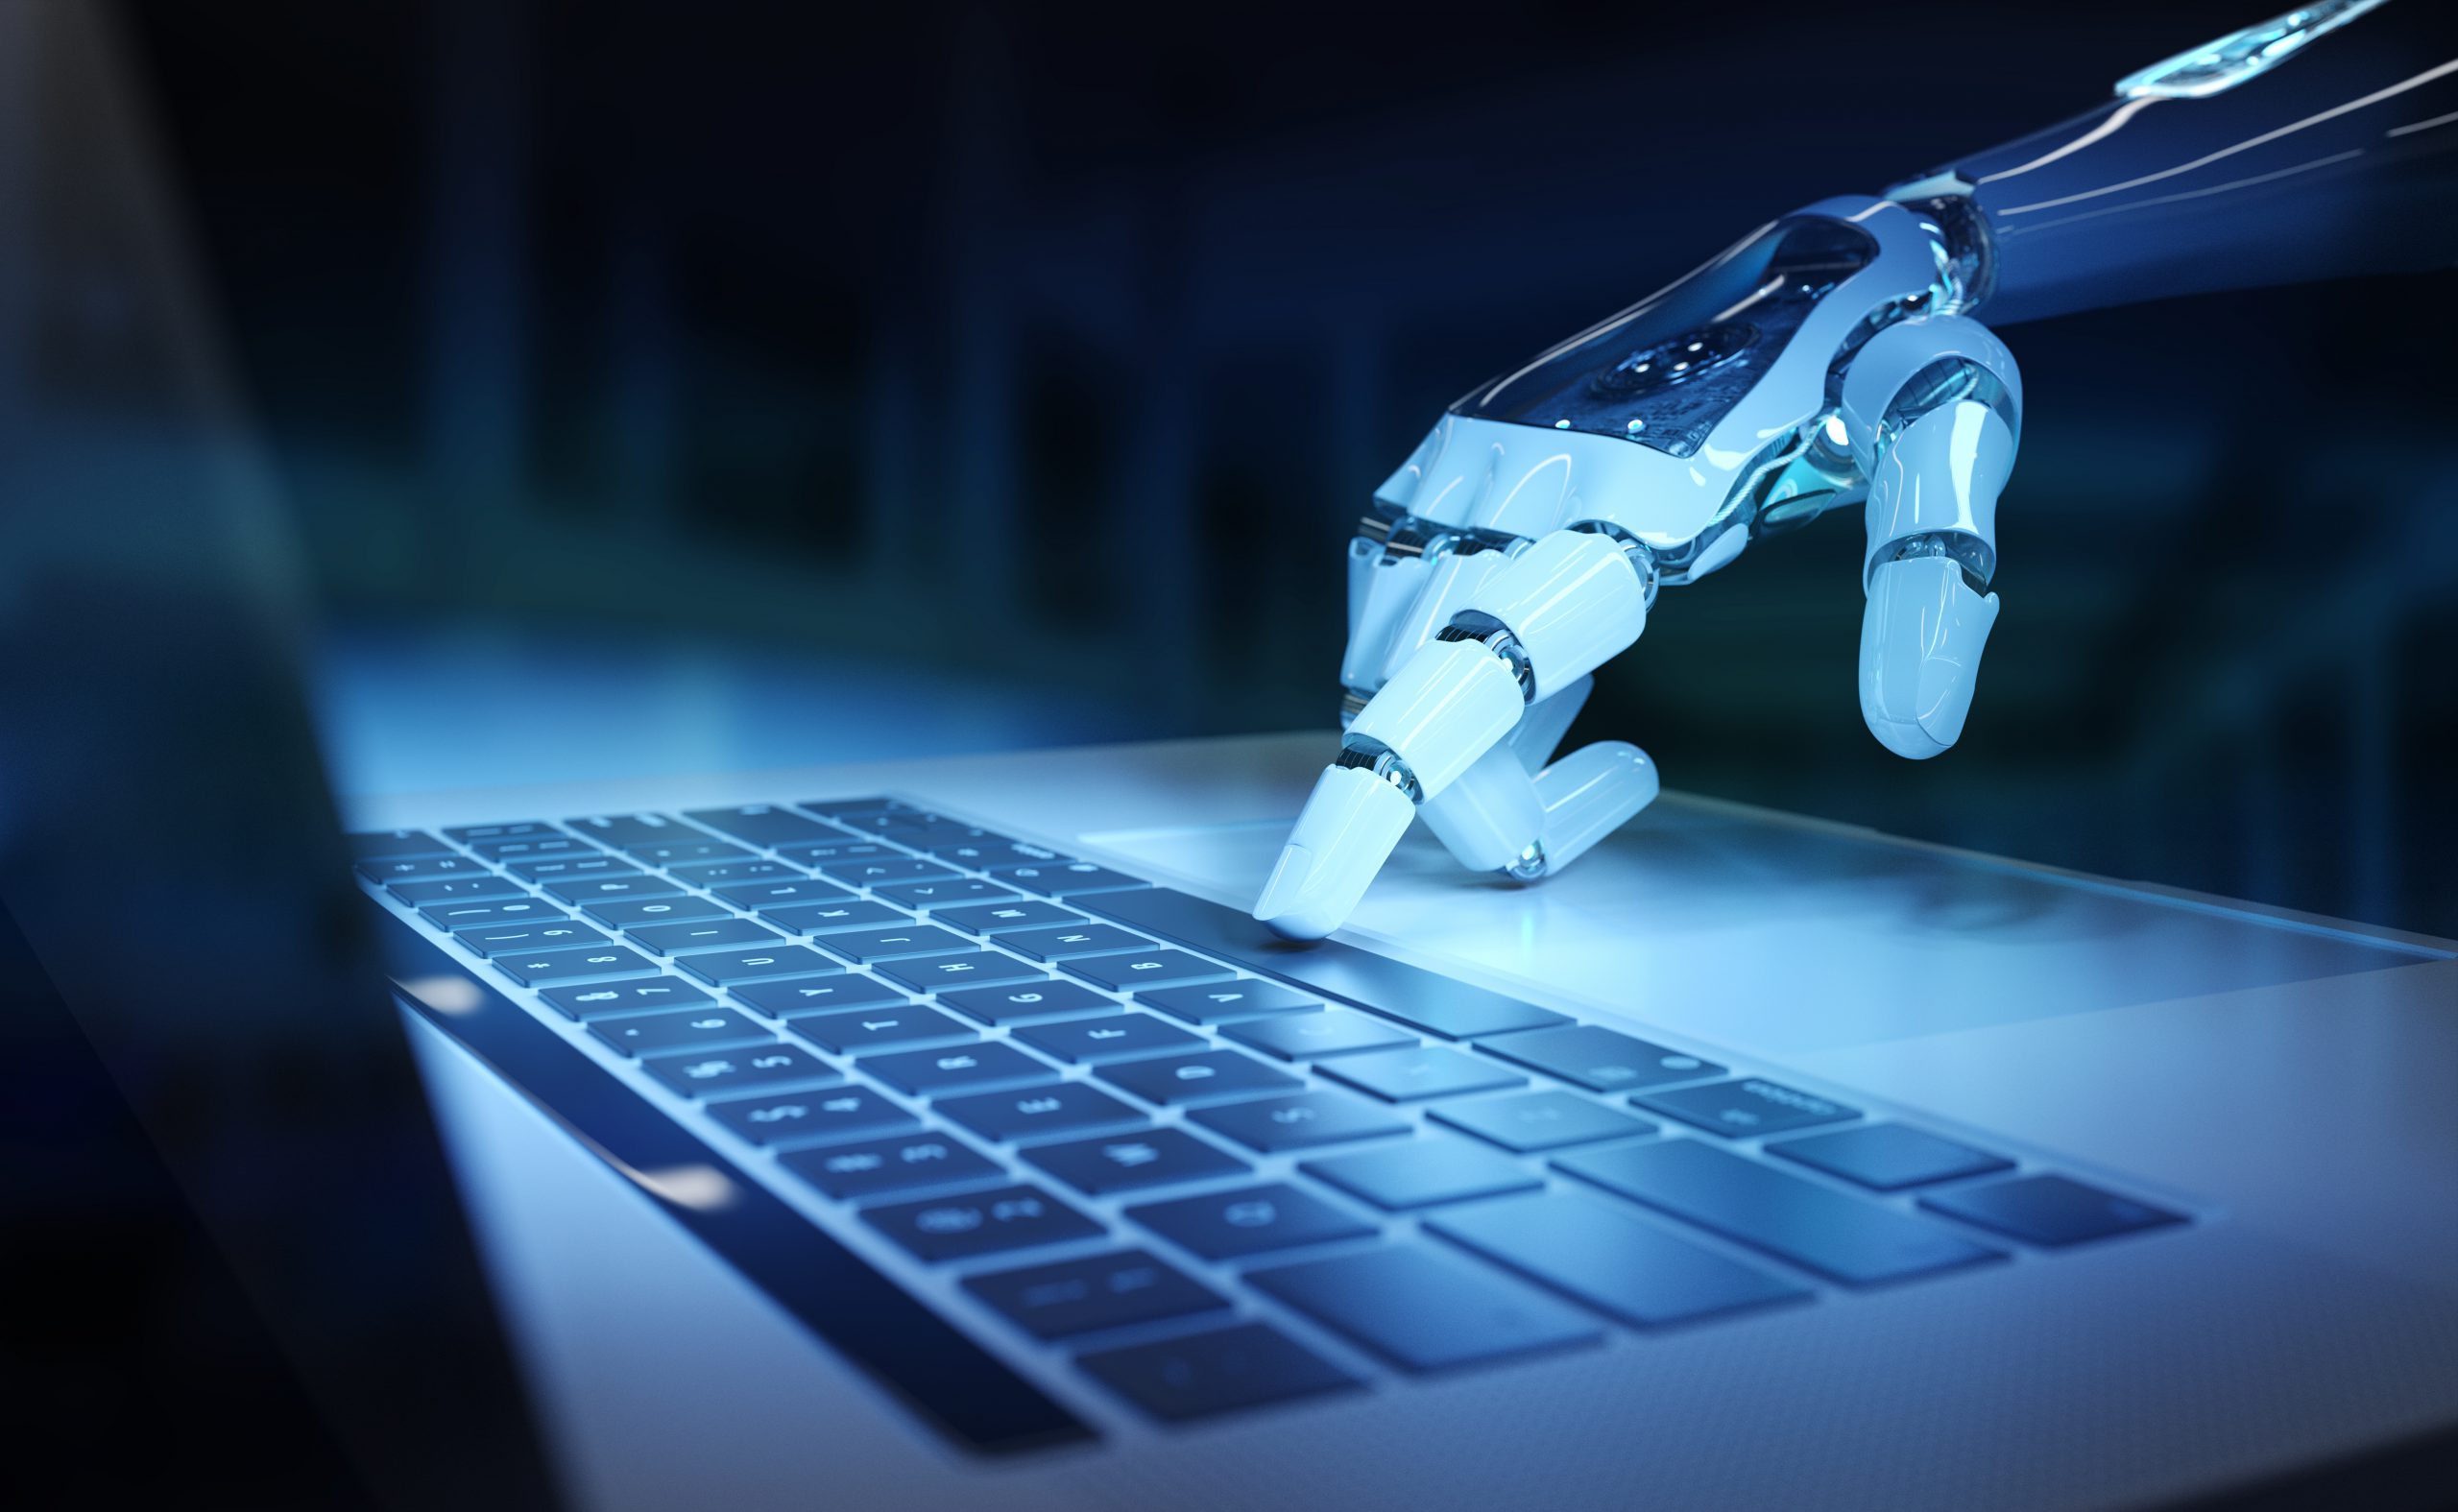 Robotic Application Monitoring - Identifying issues from an end user